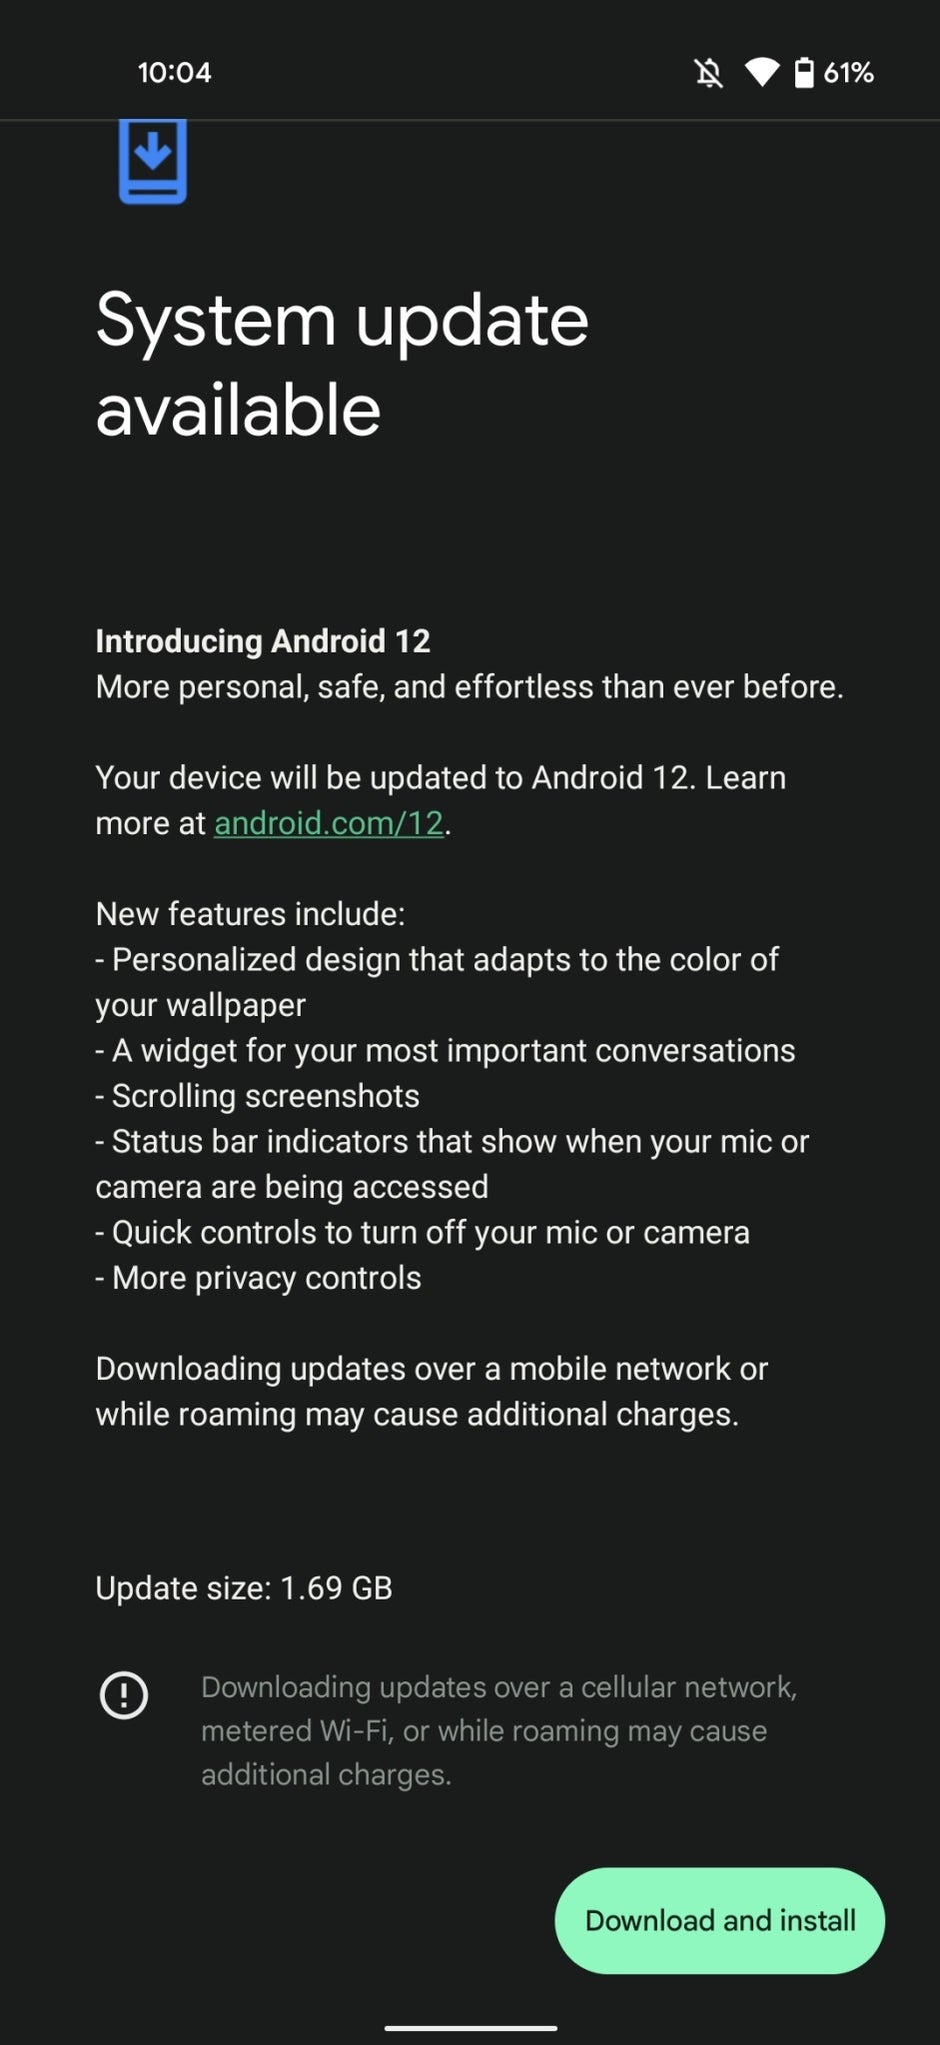 Some older Pixel models receive a prompt to install the Android 12 update for a second time - Latest Pixel problems introduce bizarre software issues that Google knows about